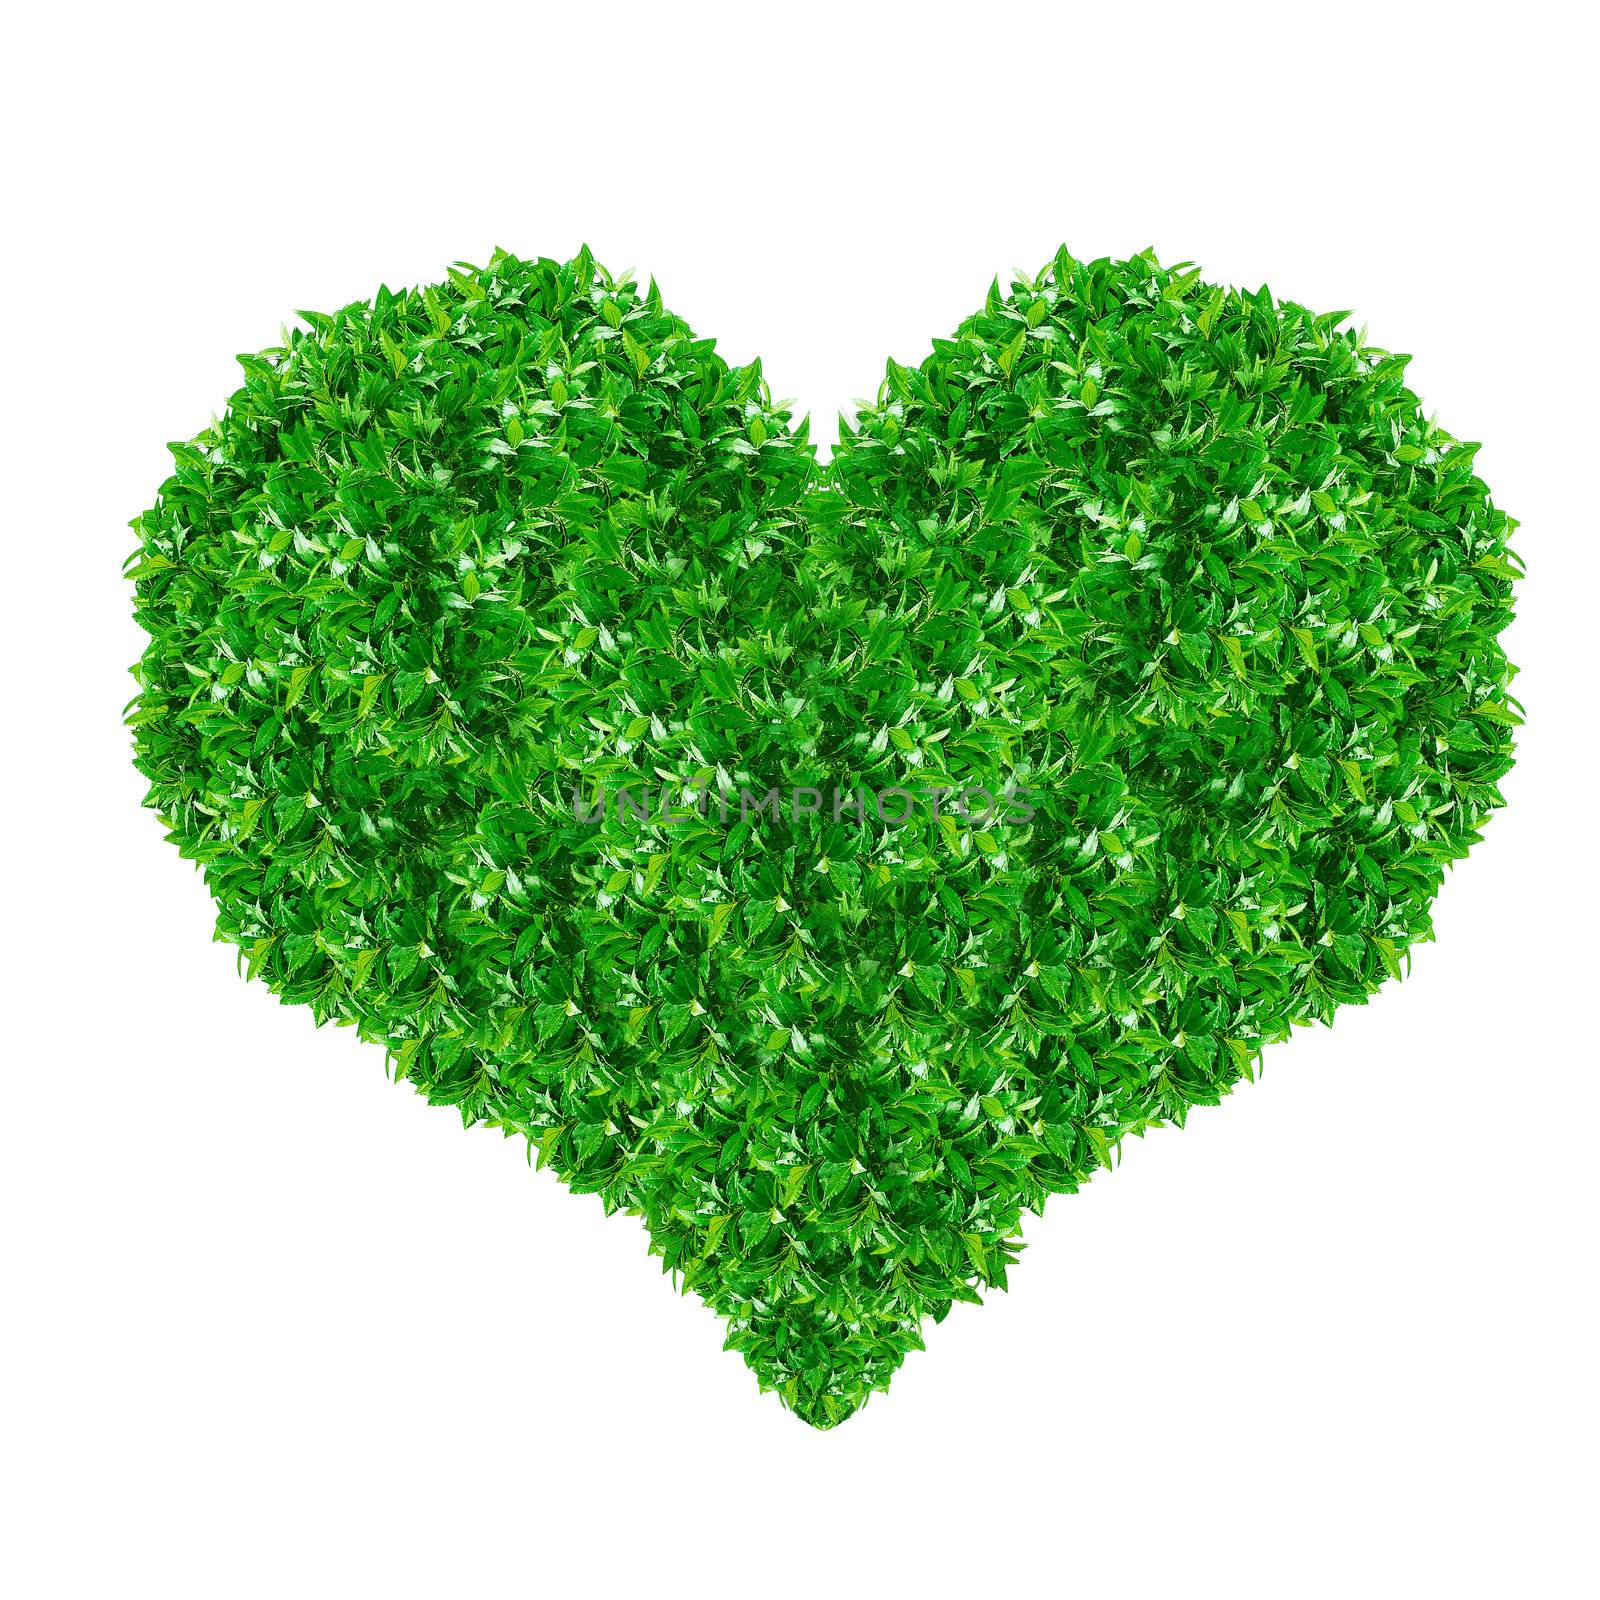 Green Heart Sign made from grass isolated on white.